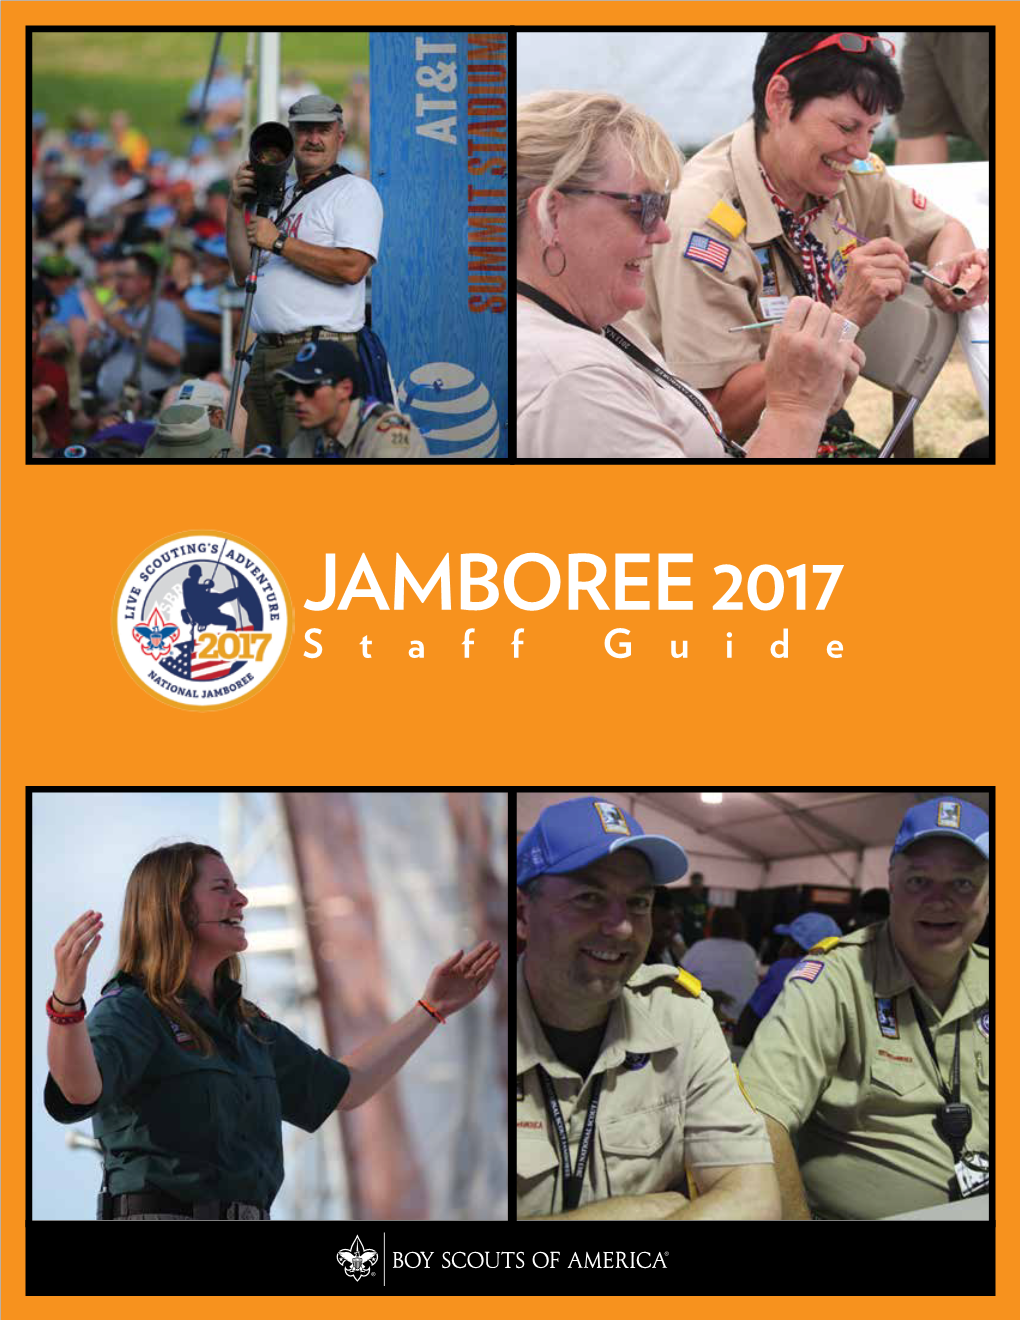 JAMBOREE 2017 Staff Guide a Message from the Jamboree Chairman